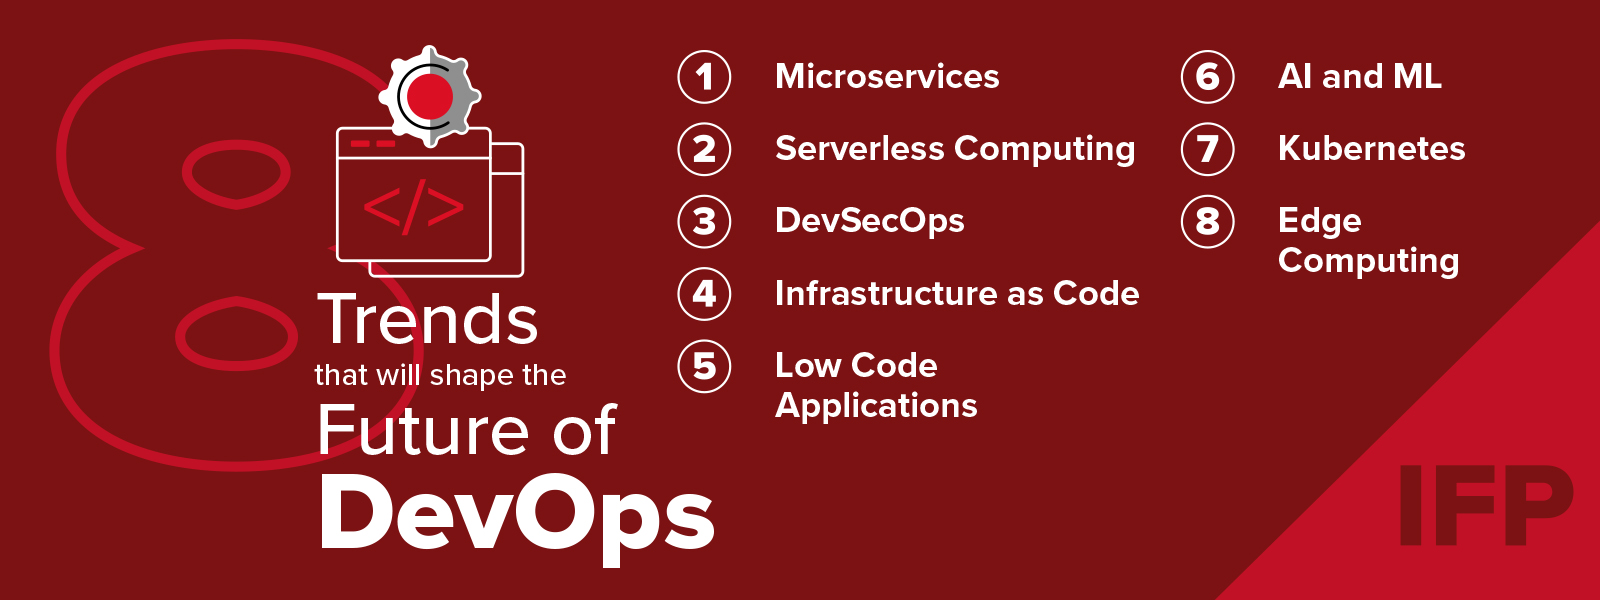 IFP visual of the 8 biggest DevOps trends for 2023